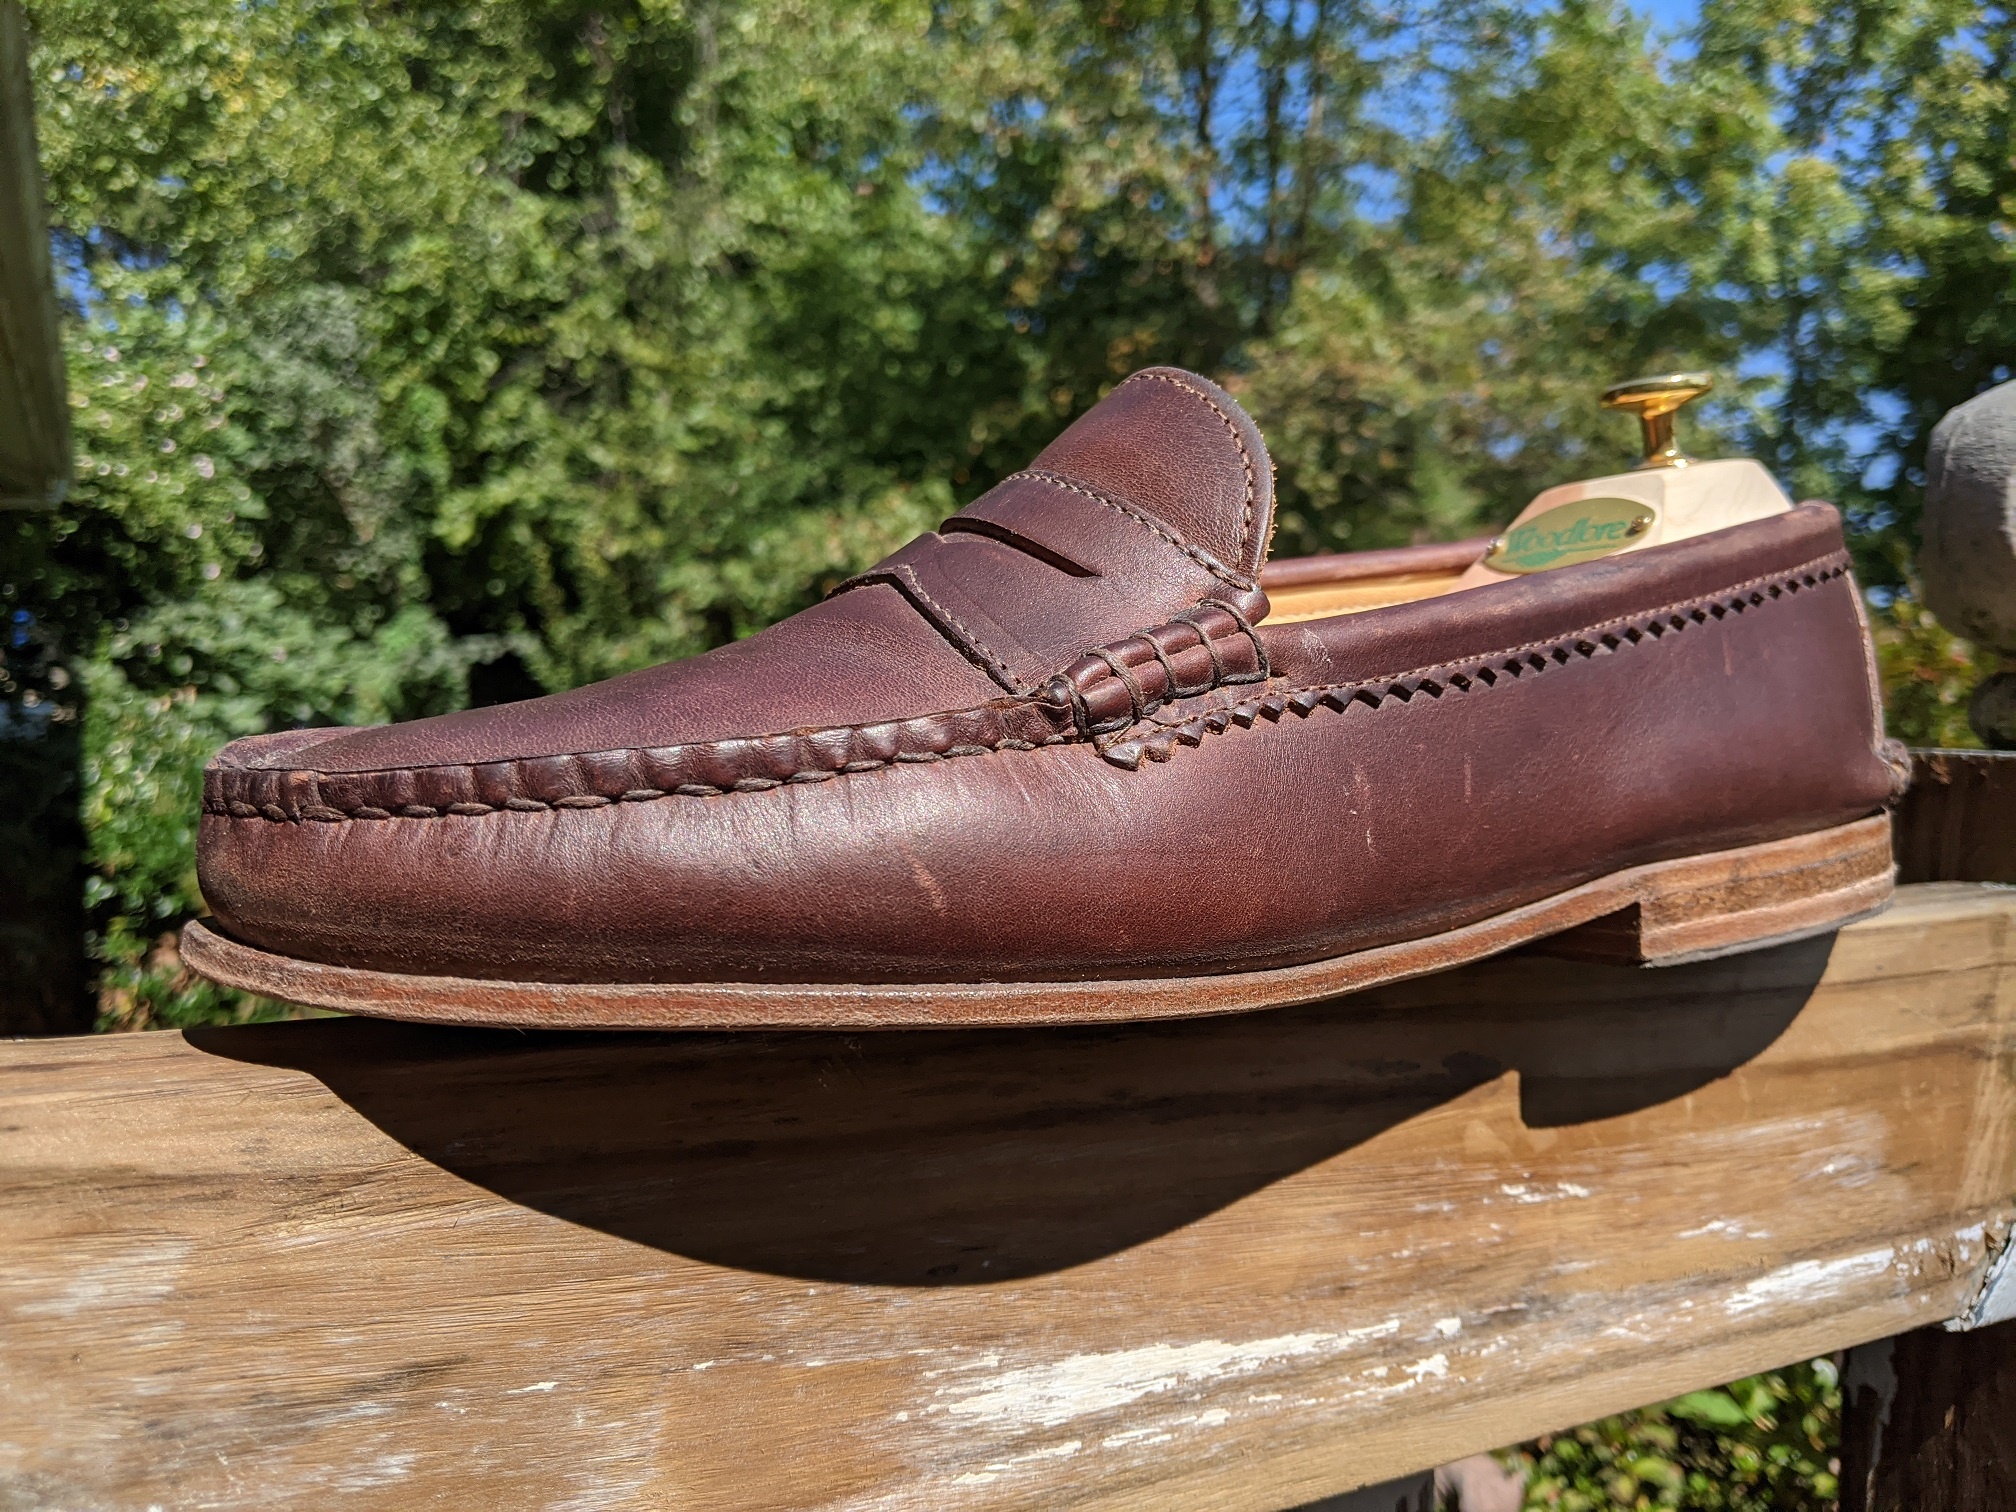 Quoddy True Penny Loafer: 5 Years On. The Best Maine Loafer?